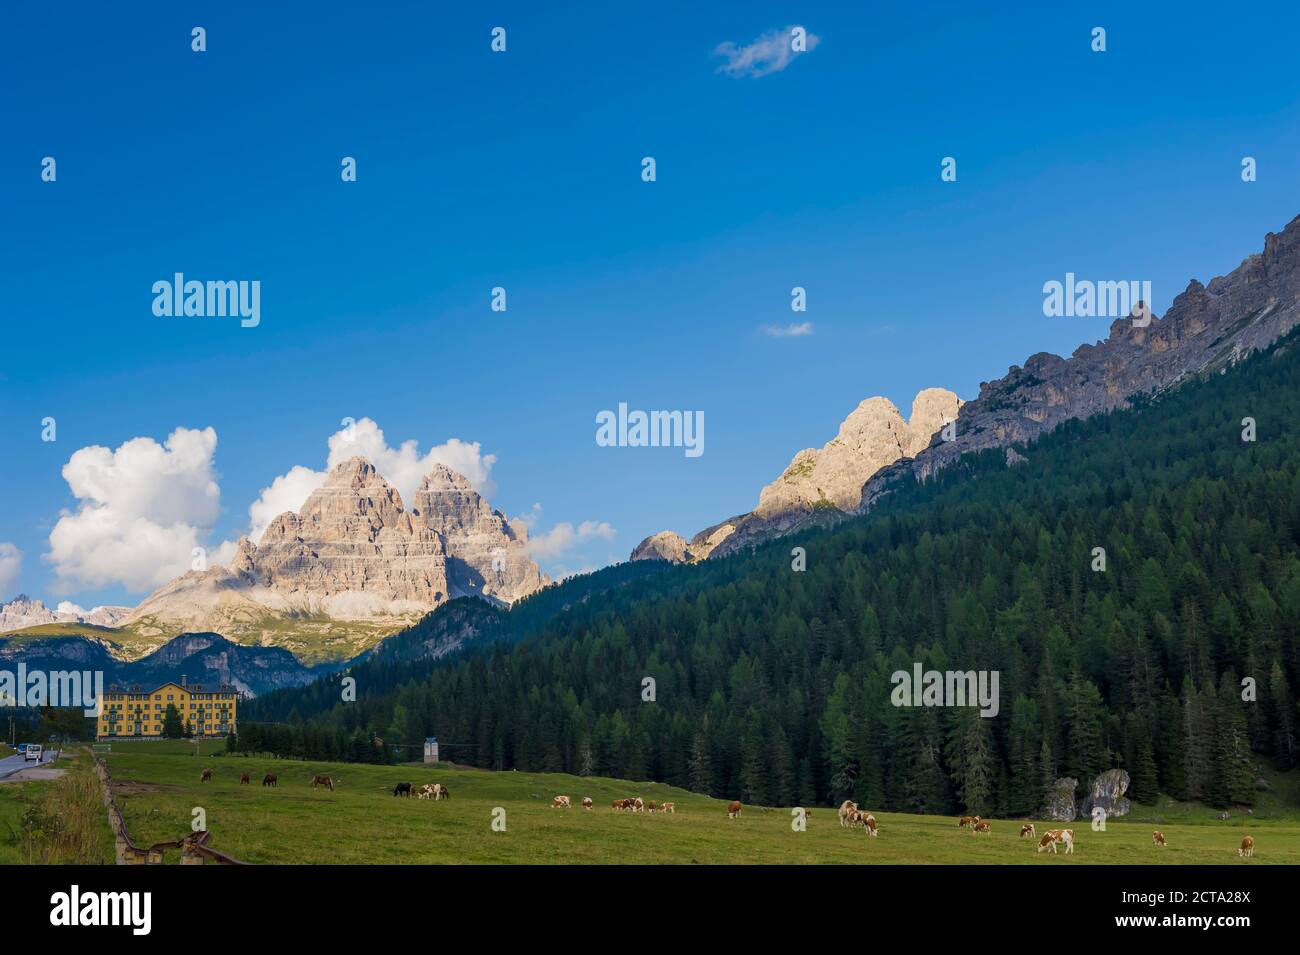 Italy, view to Dolomite Alps, cattle herd  in front Stock Photo